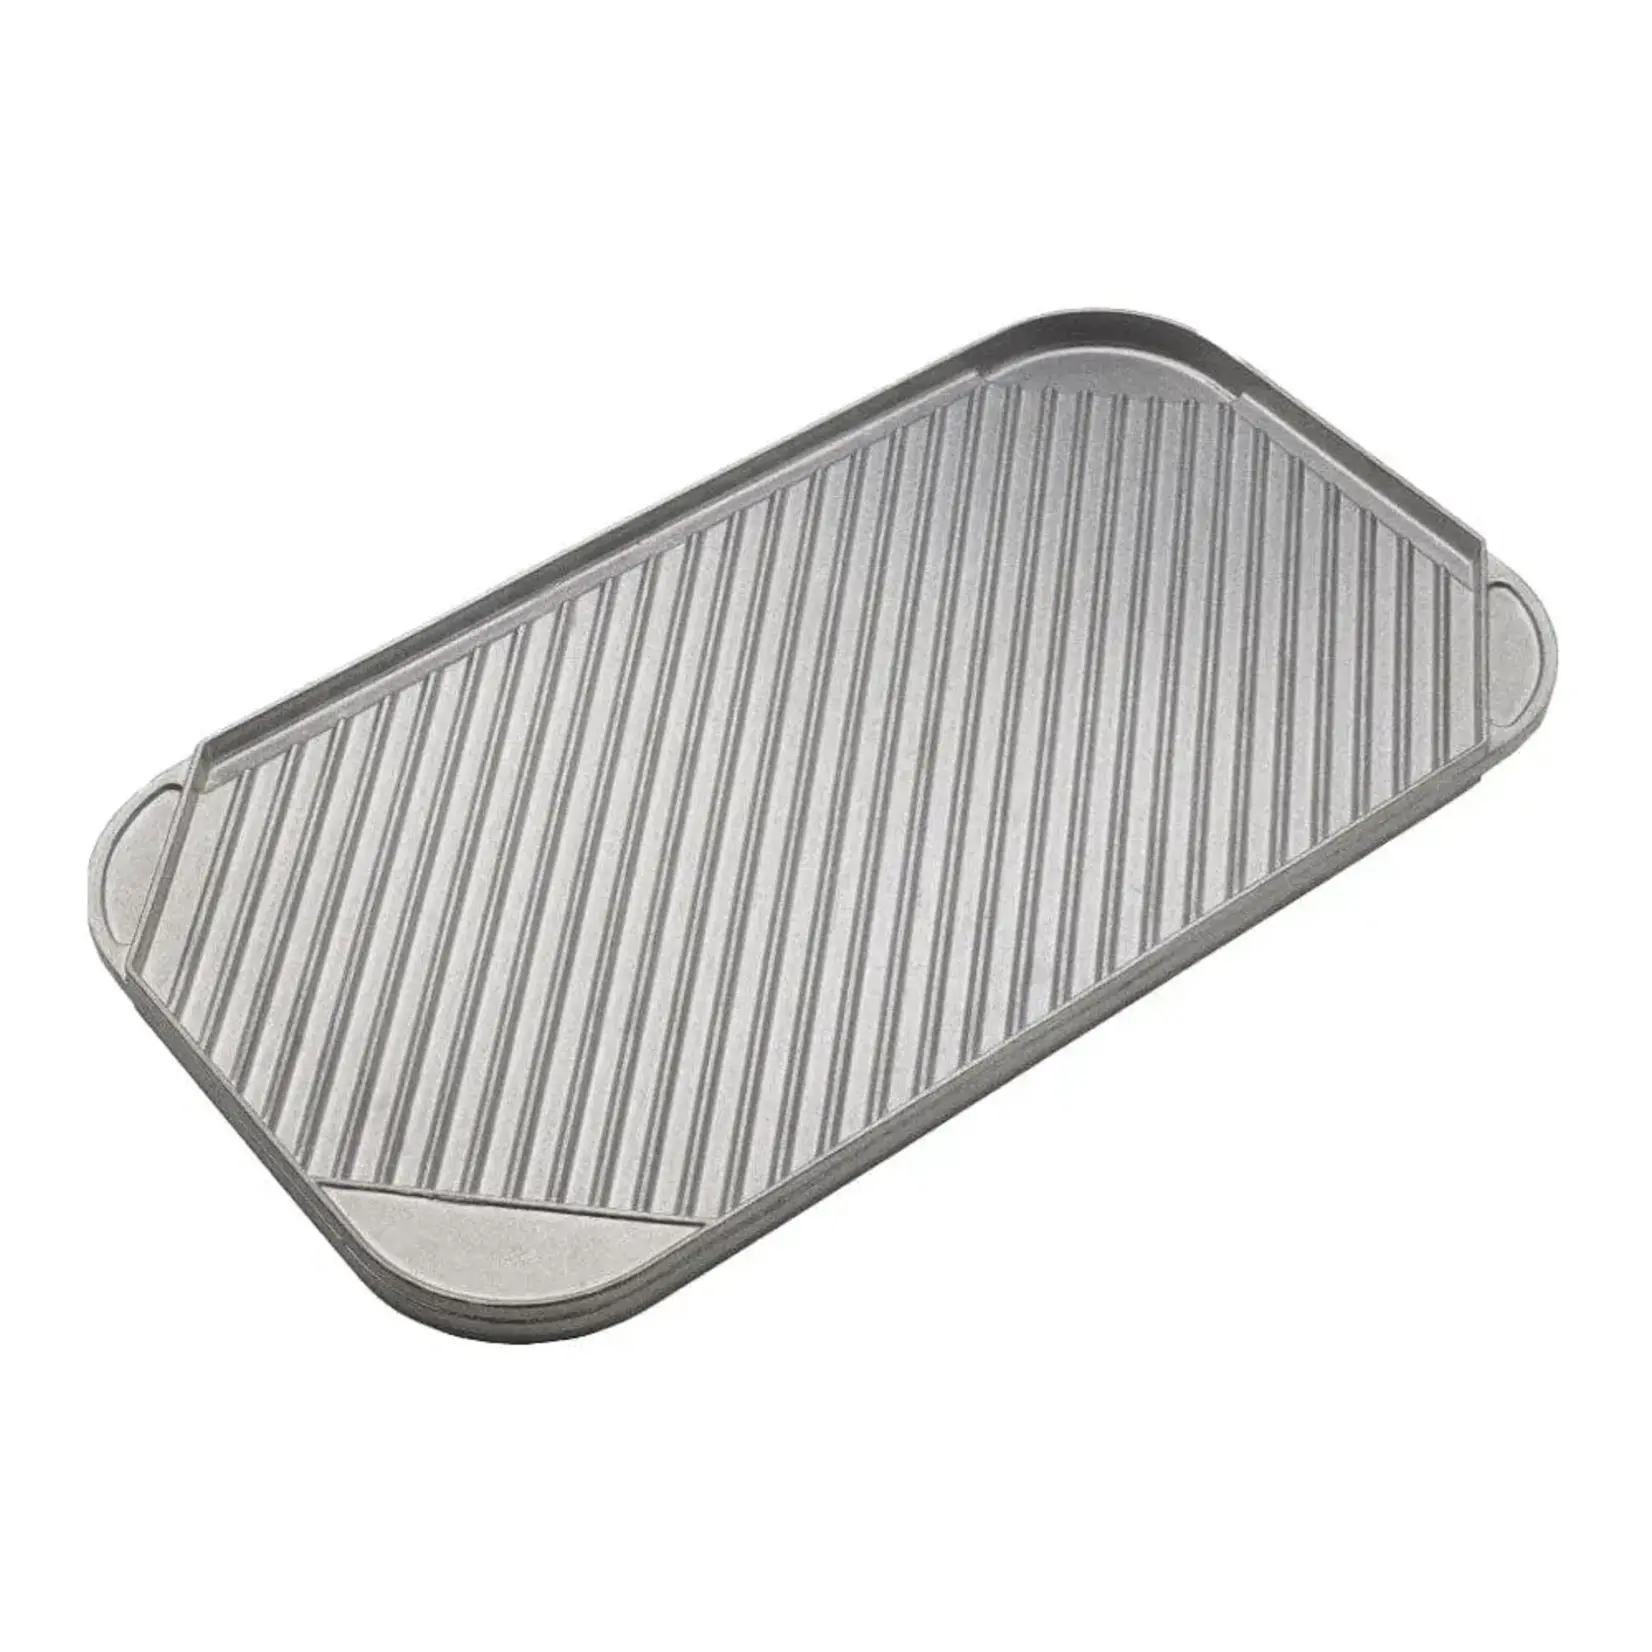 Grillware Double-Sided Grill